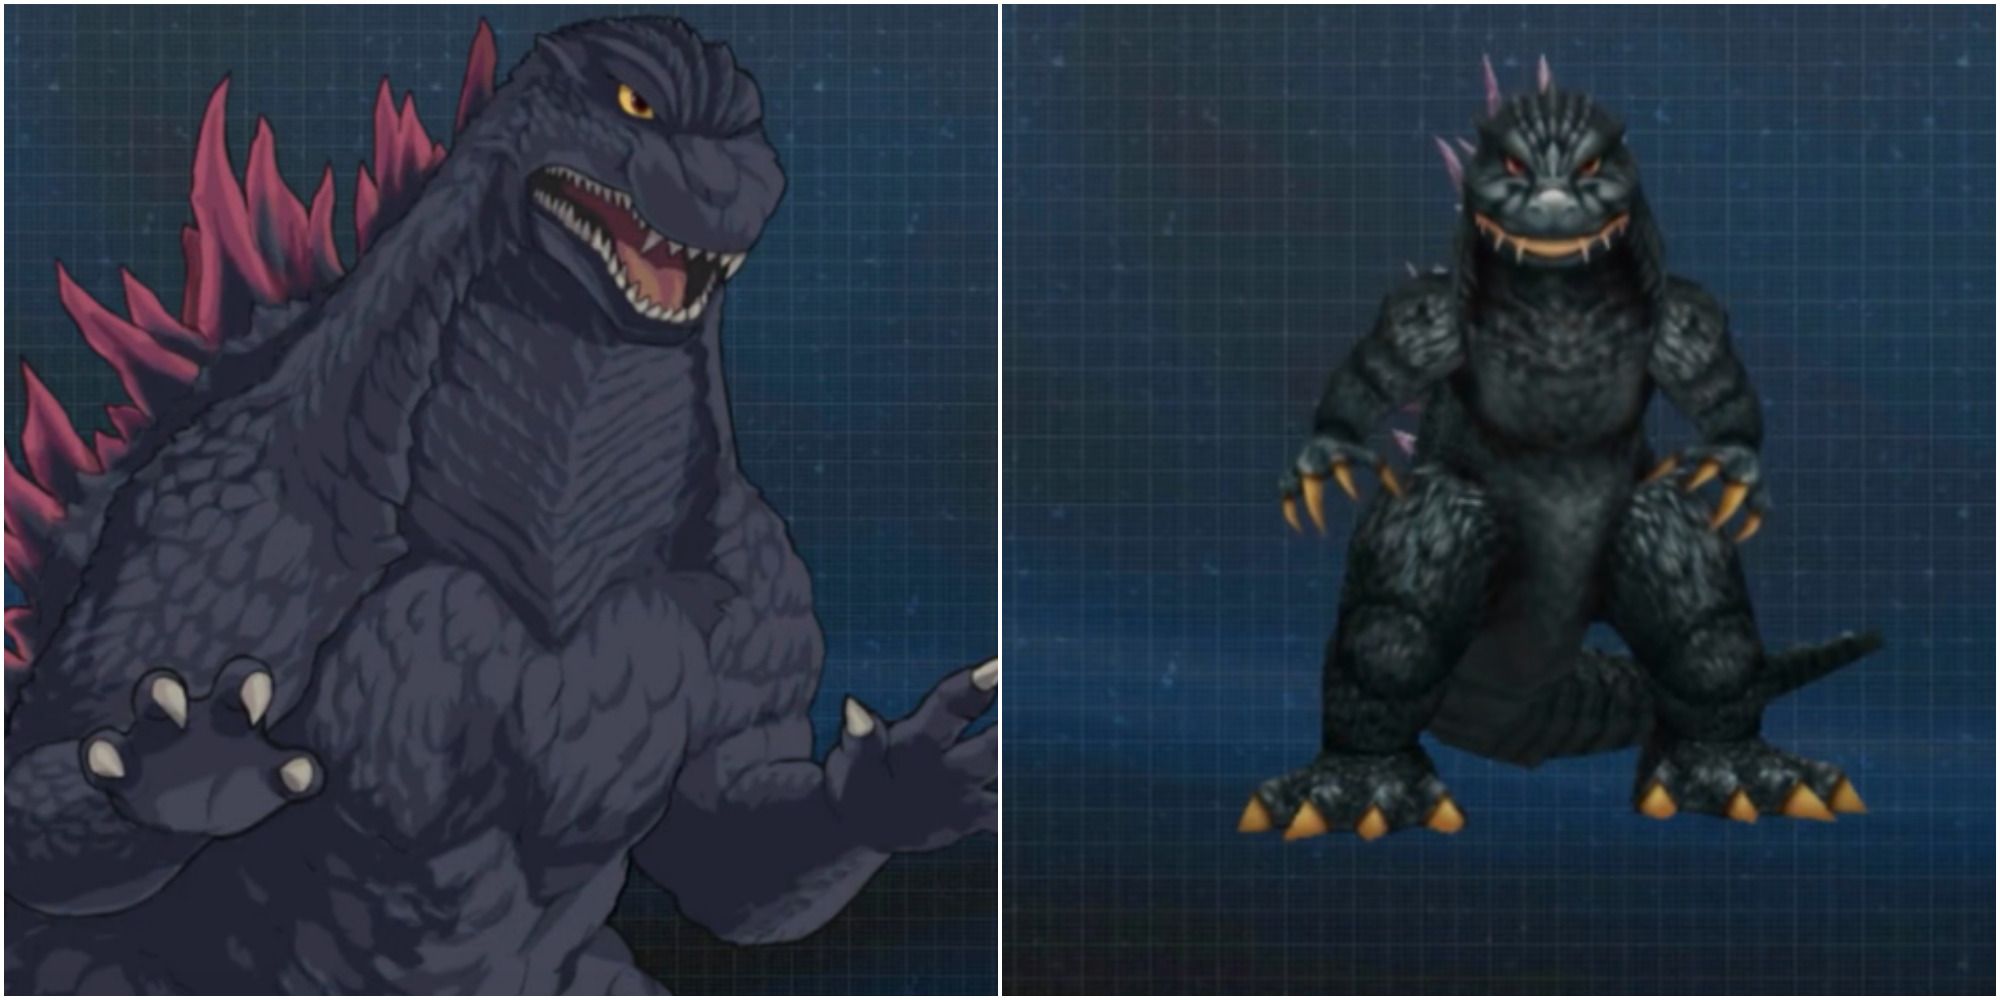 Godzilla as he appears in his Super Robot Wars cameo